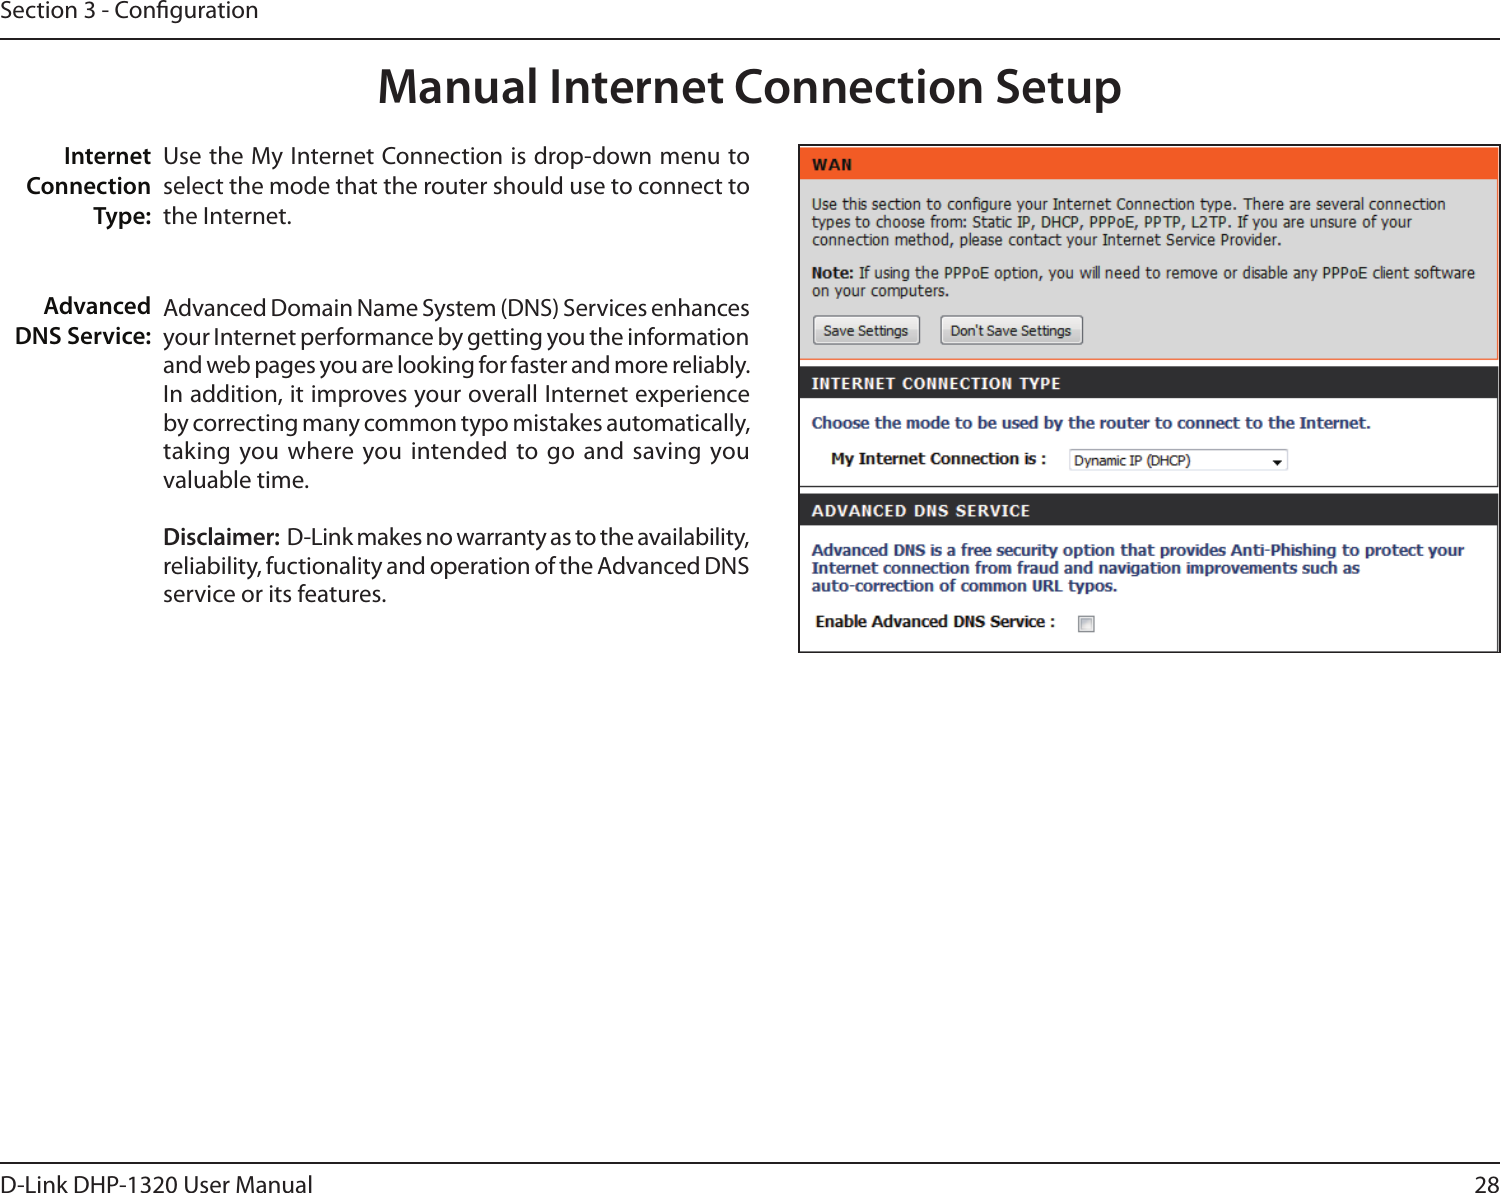 28D-Link DHP-1320 User ManualSection 3 - CongurationManual Internet Connection SetupUse the My Internet Connection is drop-down menu to select the mode that the router should use to connect to the Internet.Advanced Domain Name System (DNS) Services enhances your Internet performance by getting you the information and web pages you are looking for faster and more reliably. In addition, it improves your overall Internet experience by correcting many common typo mistakes automatically, taking  you where you intended to go  and saving you valuable time. Disclaimer:  D-Link makes no warranty as to the availability, reliability, fuctionality and operation of the Advanced DNS service or its features. Internet Connection Type:Advanced DNS Service: